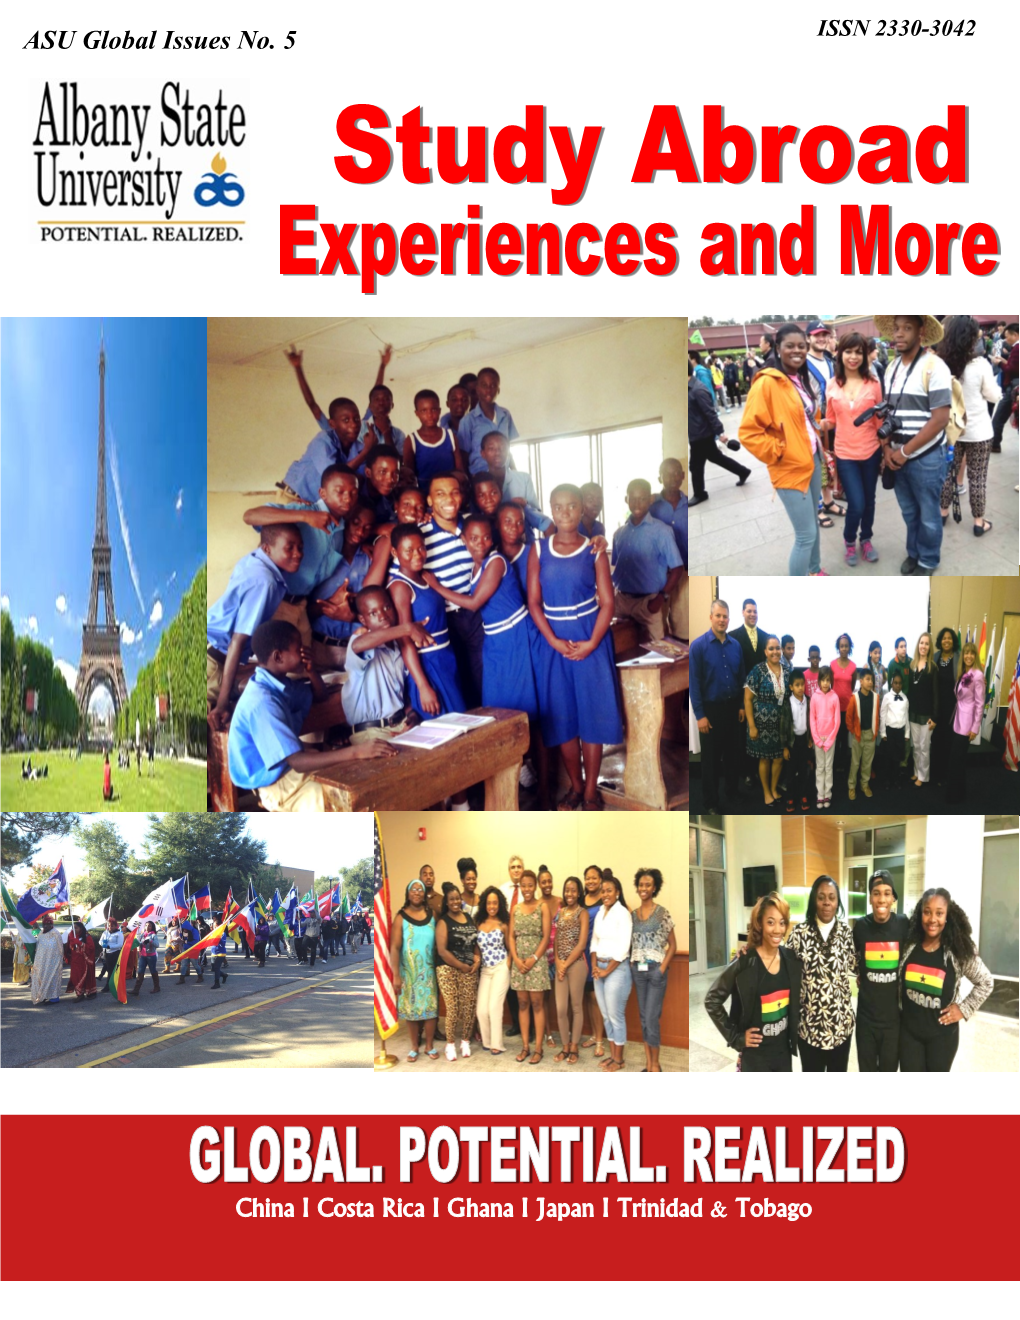 ASU Global Issues No. 5- Study Abroad Experiences